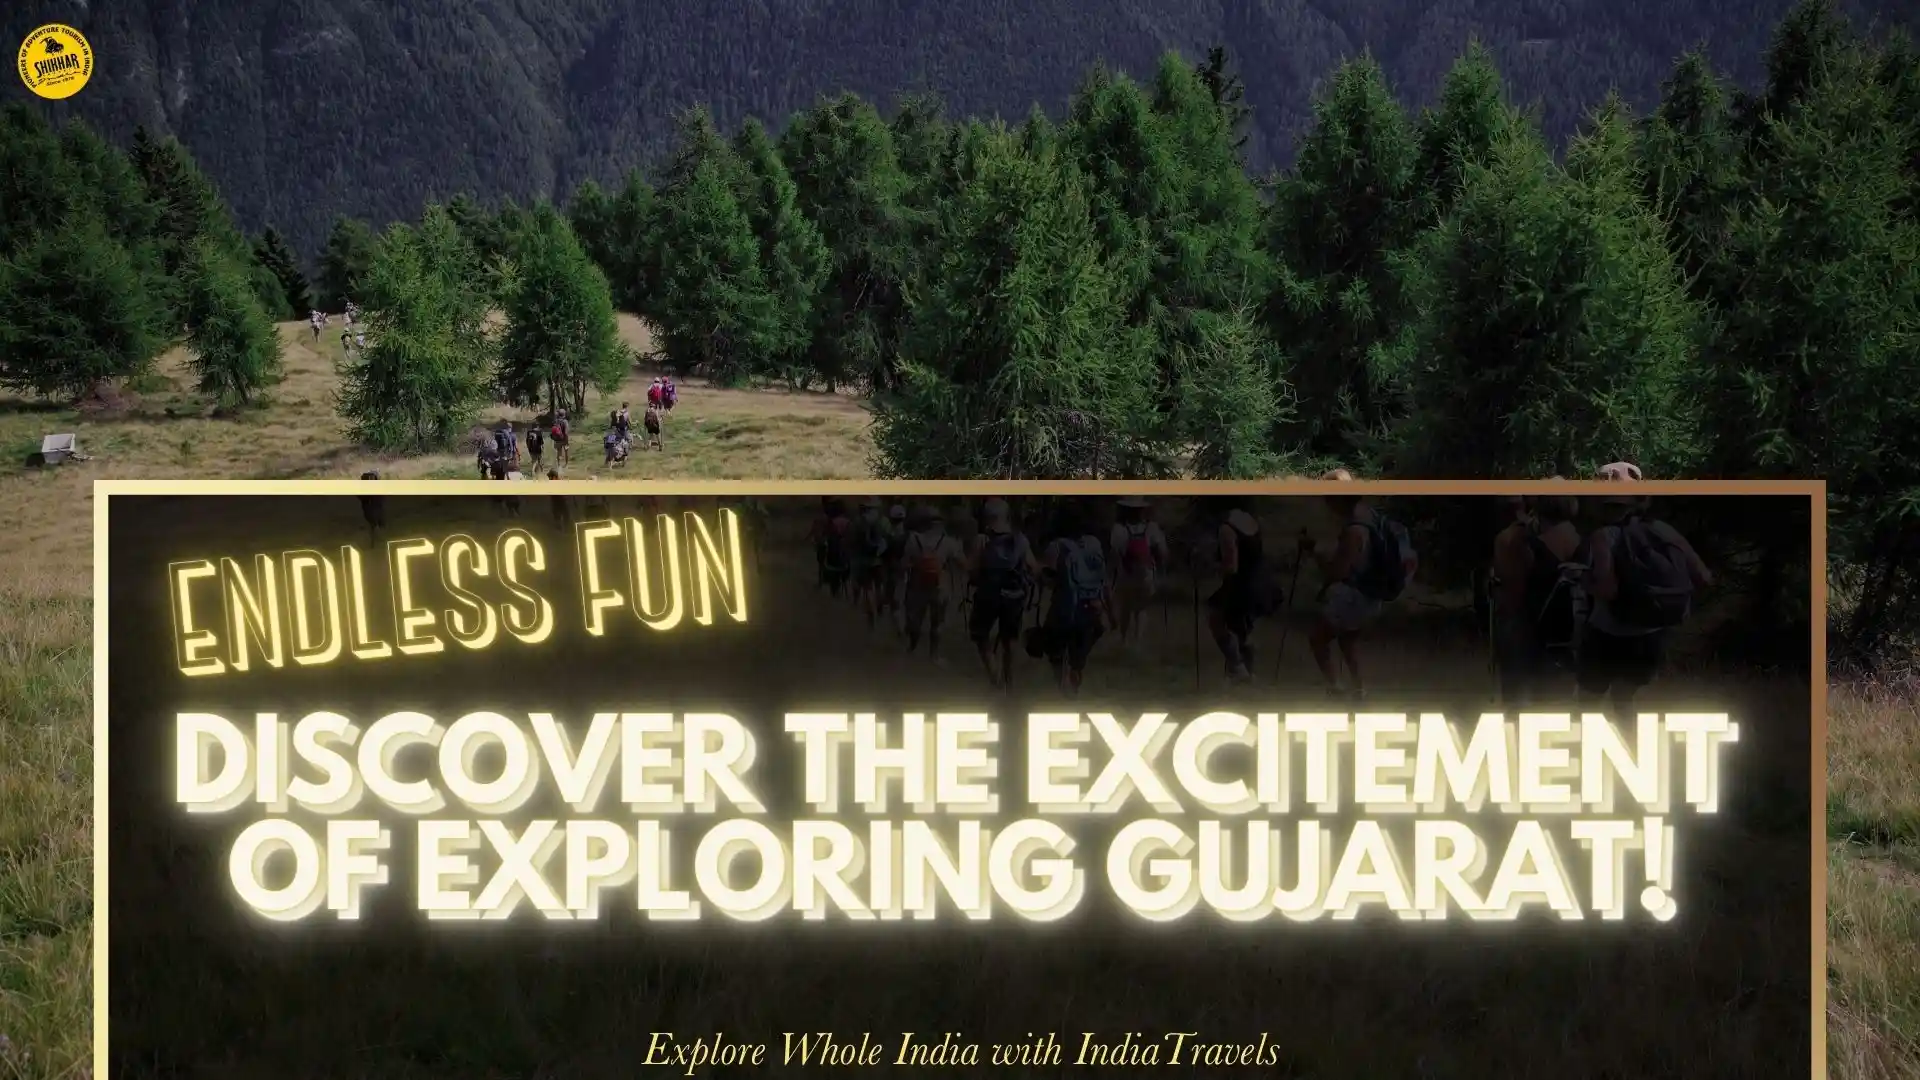 “Endless Fun: Discover the Excitement of Exploring Gujarat!”